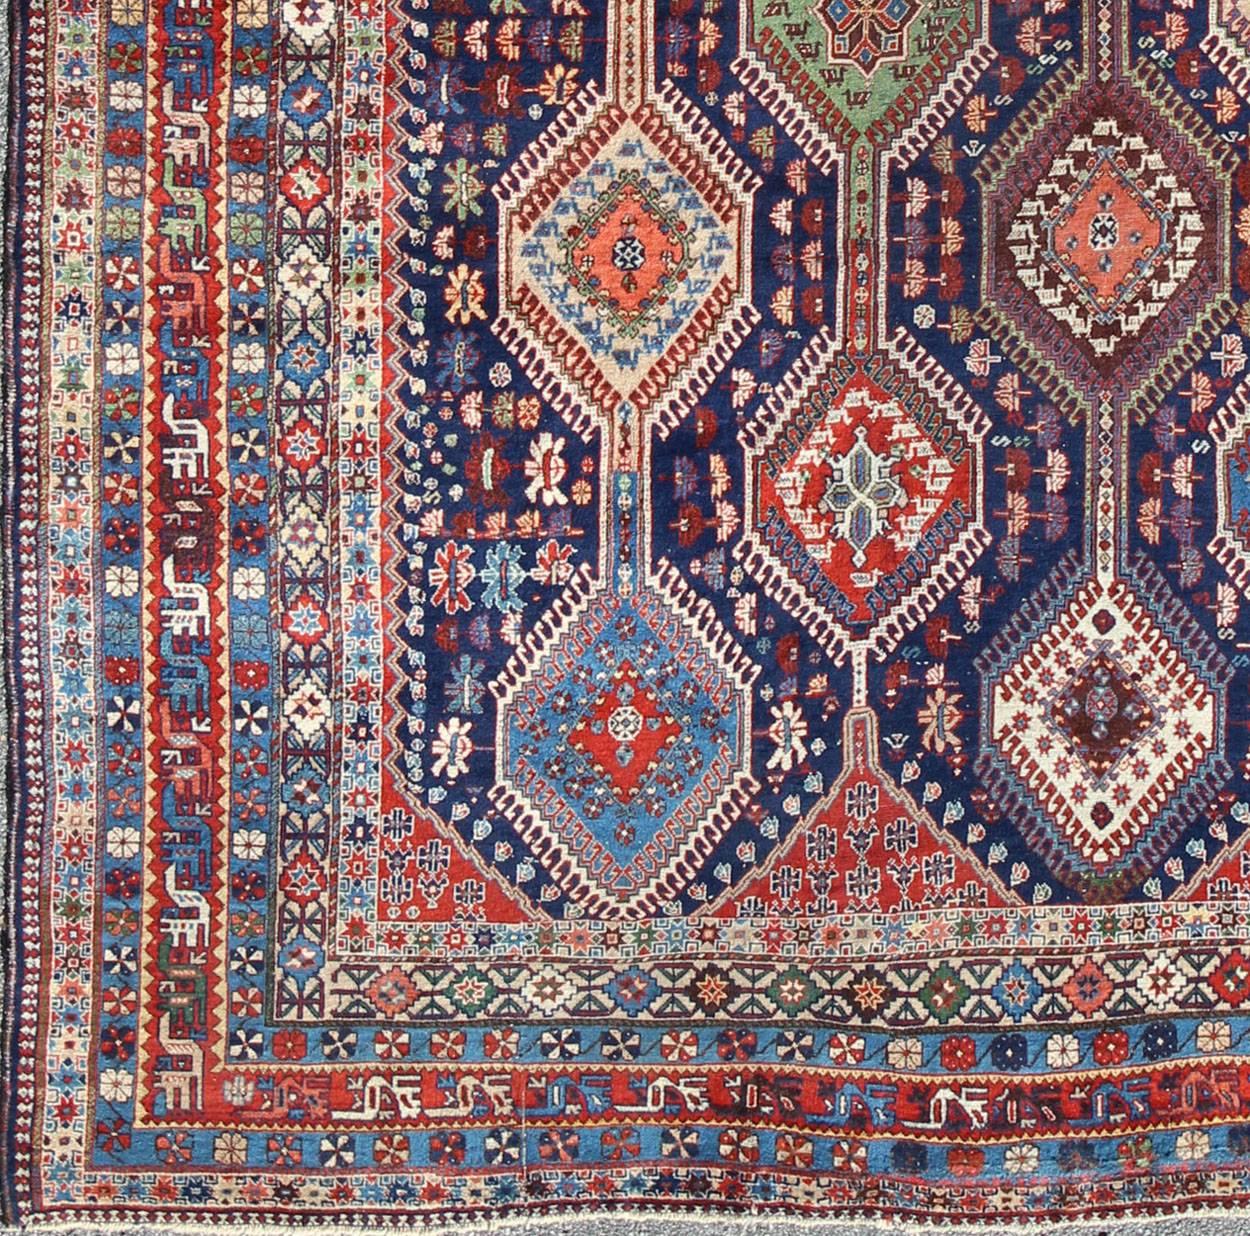 Antique Persian Large Qashqai Rug with Rich Jewel Tones and Diamond Design, kwarugs, Keivan Woven Arts Rug#16-0906, Unusually large in size for an Qashqai, Bold geometry, rich symbolism, and vivid coloration enhance the beauty of this stunning